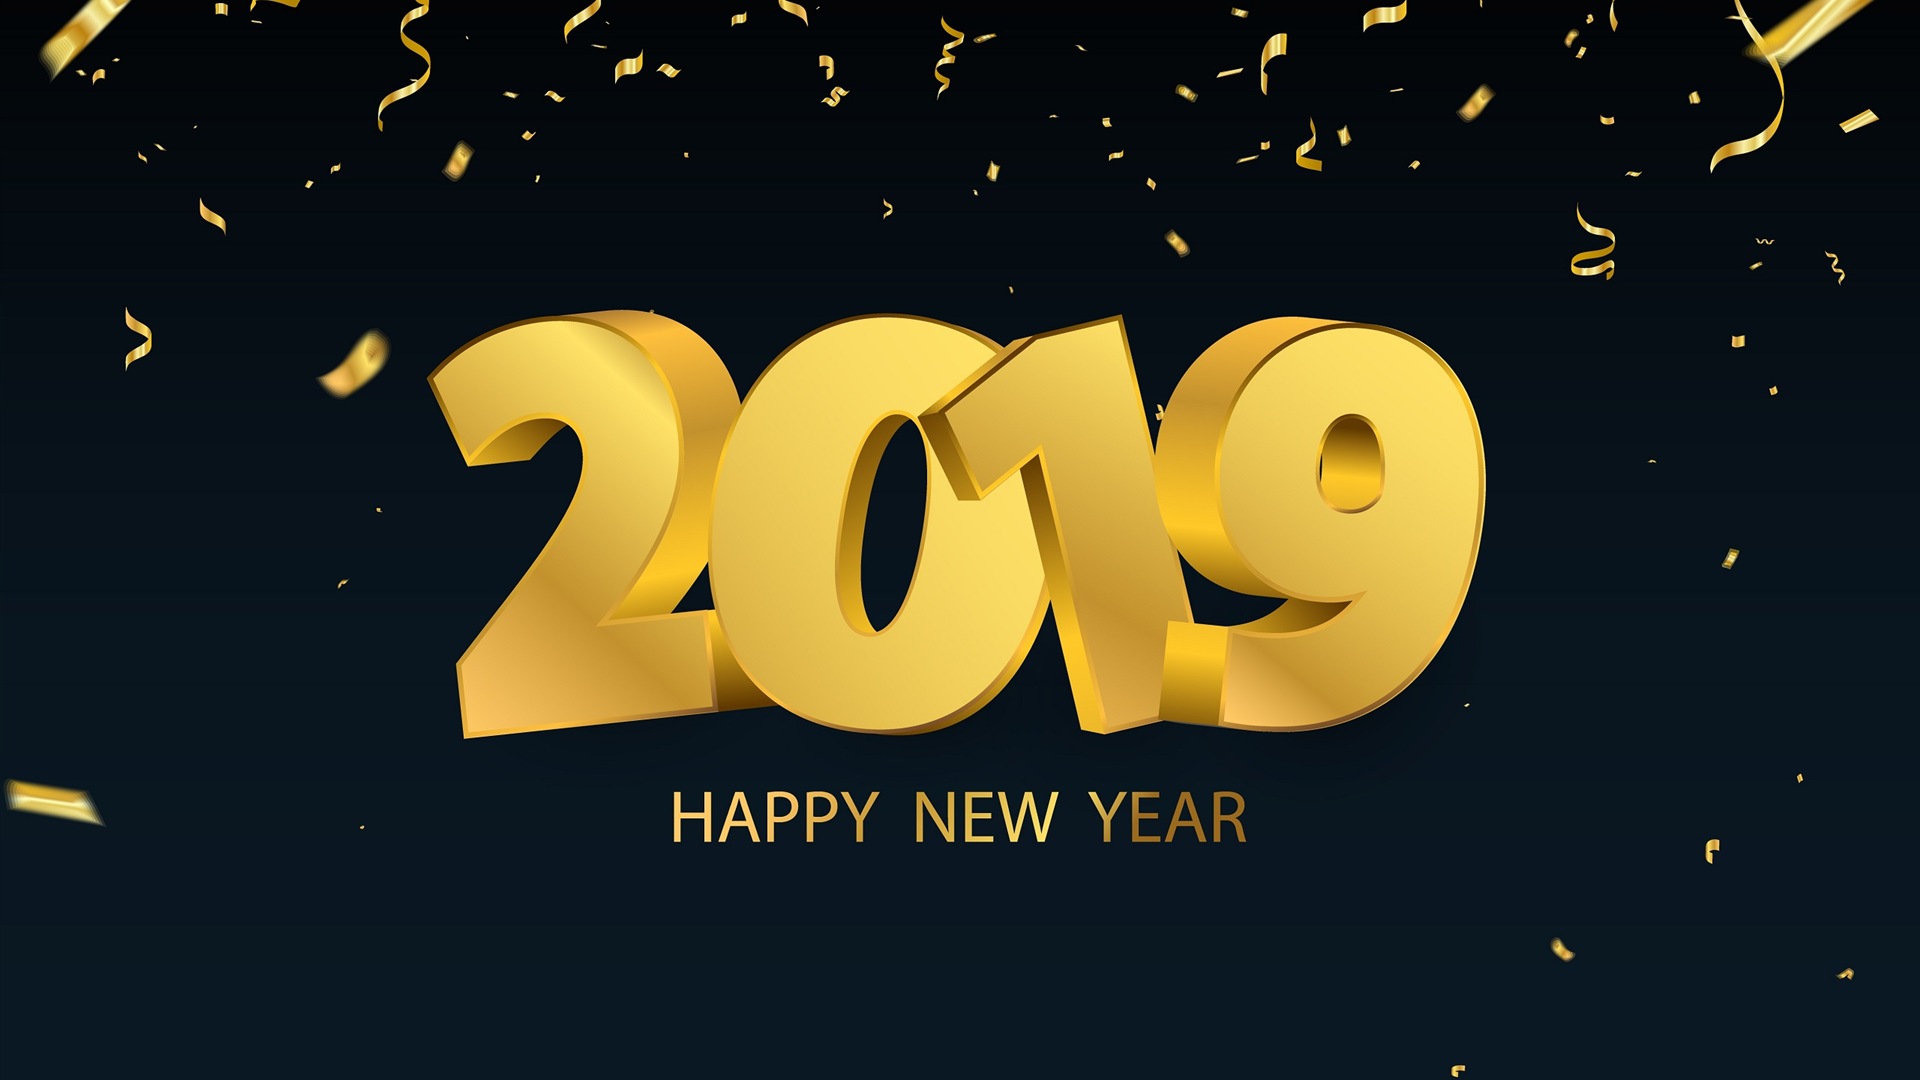 Happy New Year 2019 HD wallpapers #13 - 1920x1080